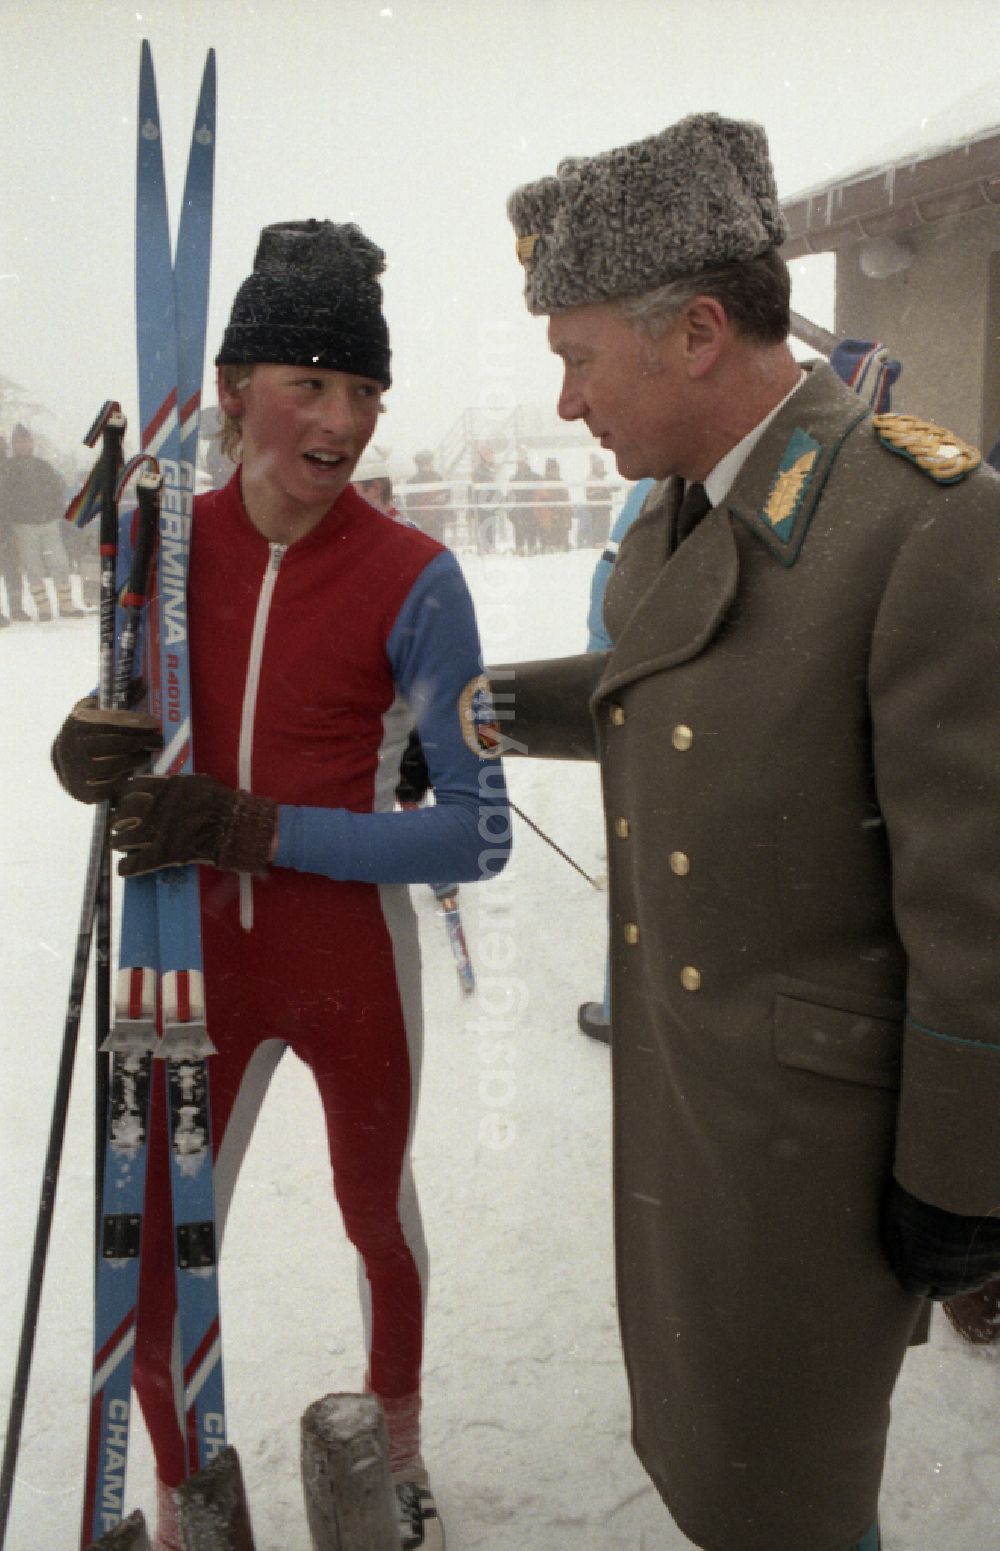 GDR picture archive: Kurort Oberwiesenthal - Gymnastics and sports festival Spartakiade in Oberwiesenthal Erzgebirge in the state of Saxony on the territory of the former GDR, German Democratic Republic. Aviator - cosmonaut Sigmund Jaehn - in the winter uniform of a major general of the LSK/LV air force of the NVA National People's Army - on the cross-country track of the skiers during the XI. Children and Youth Spartakiade of the GDR in Oberwiesenthal